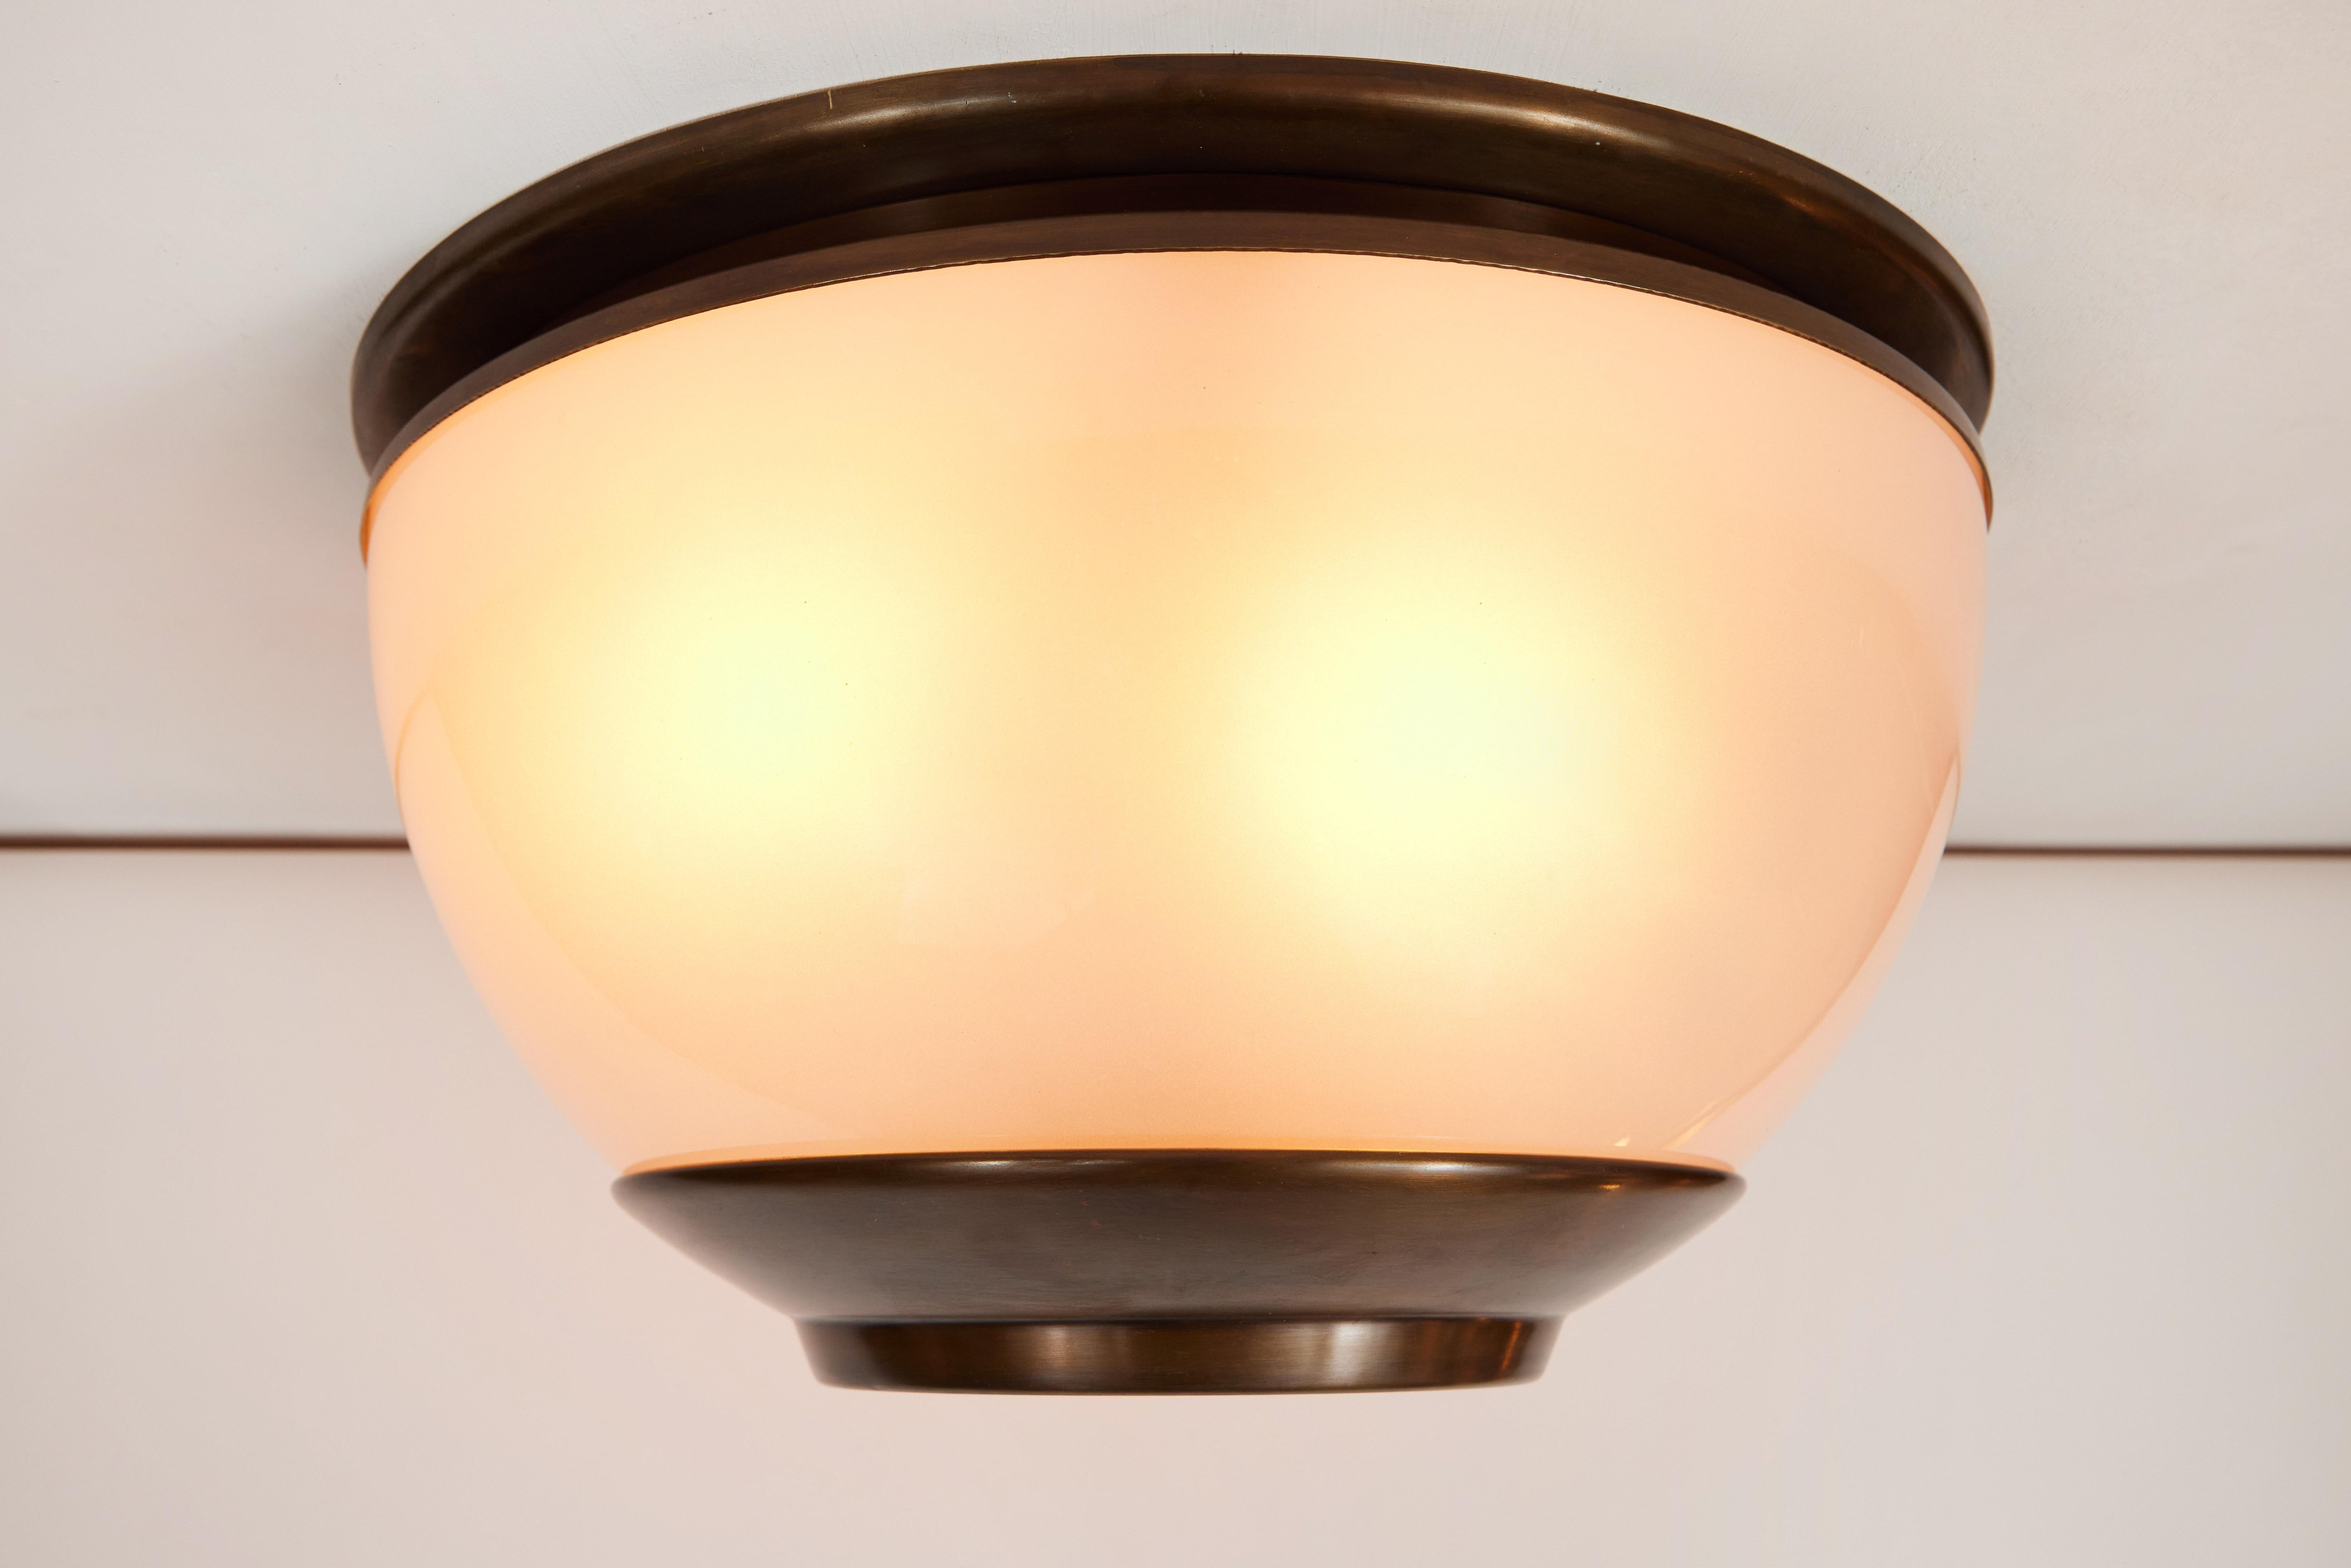 1960s Luigi Caccia Dominioni LSP3 ceiling or wall light for Azucena. Executed in blown opaline glass and patinated brass. 

Azucena was one of the most innovative lighting design companies in Italy during the midcentury era. Their designs have been